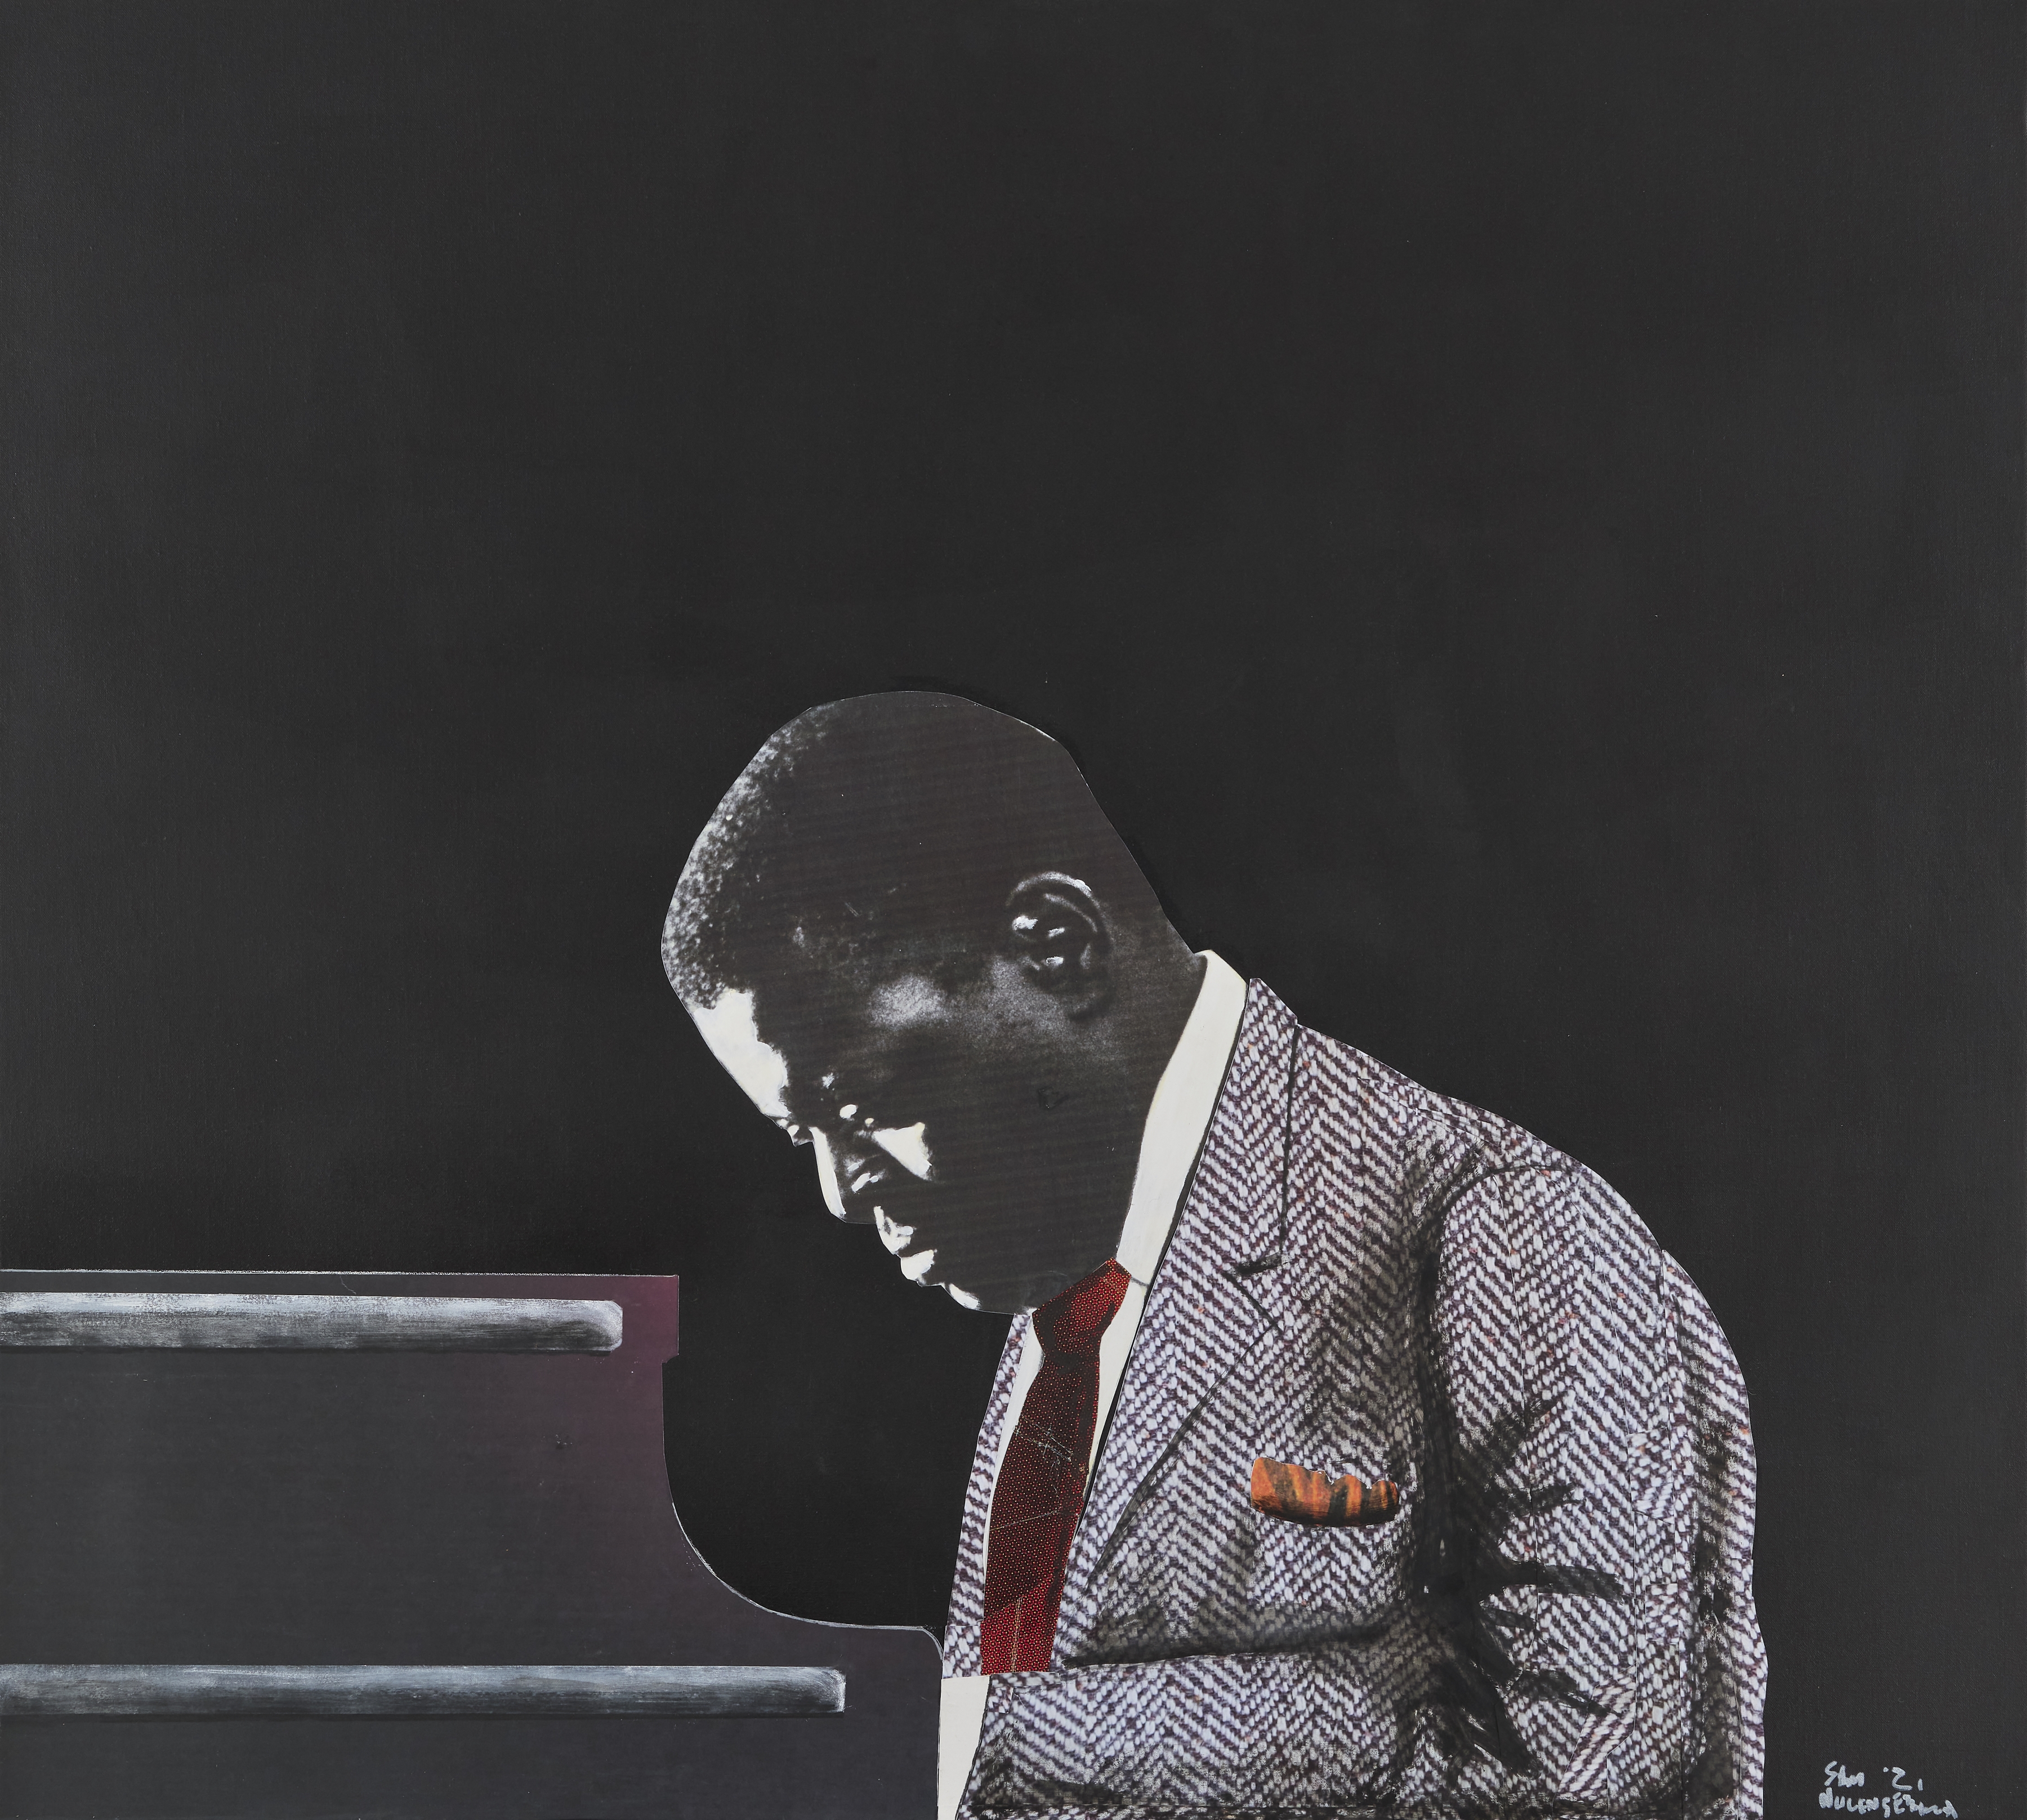 Oscar Peterson, 2021
Mixed media collage on canvas
20.5 x 100.5 x 10.1 cm
Enquire